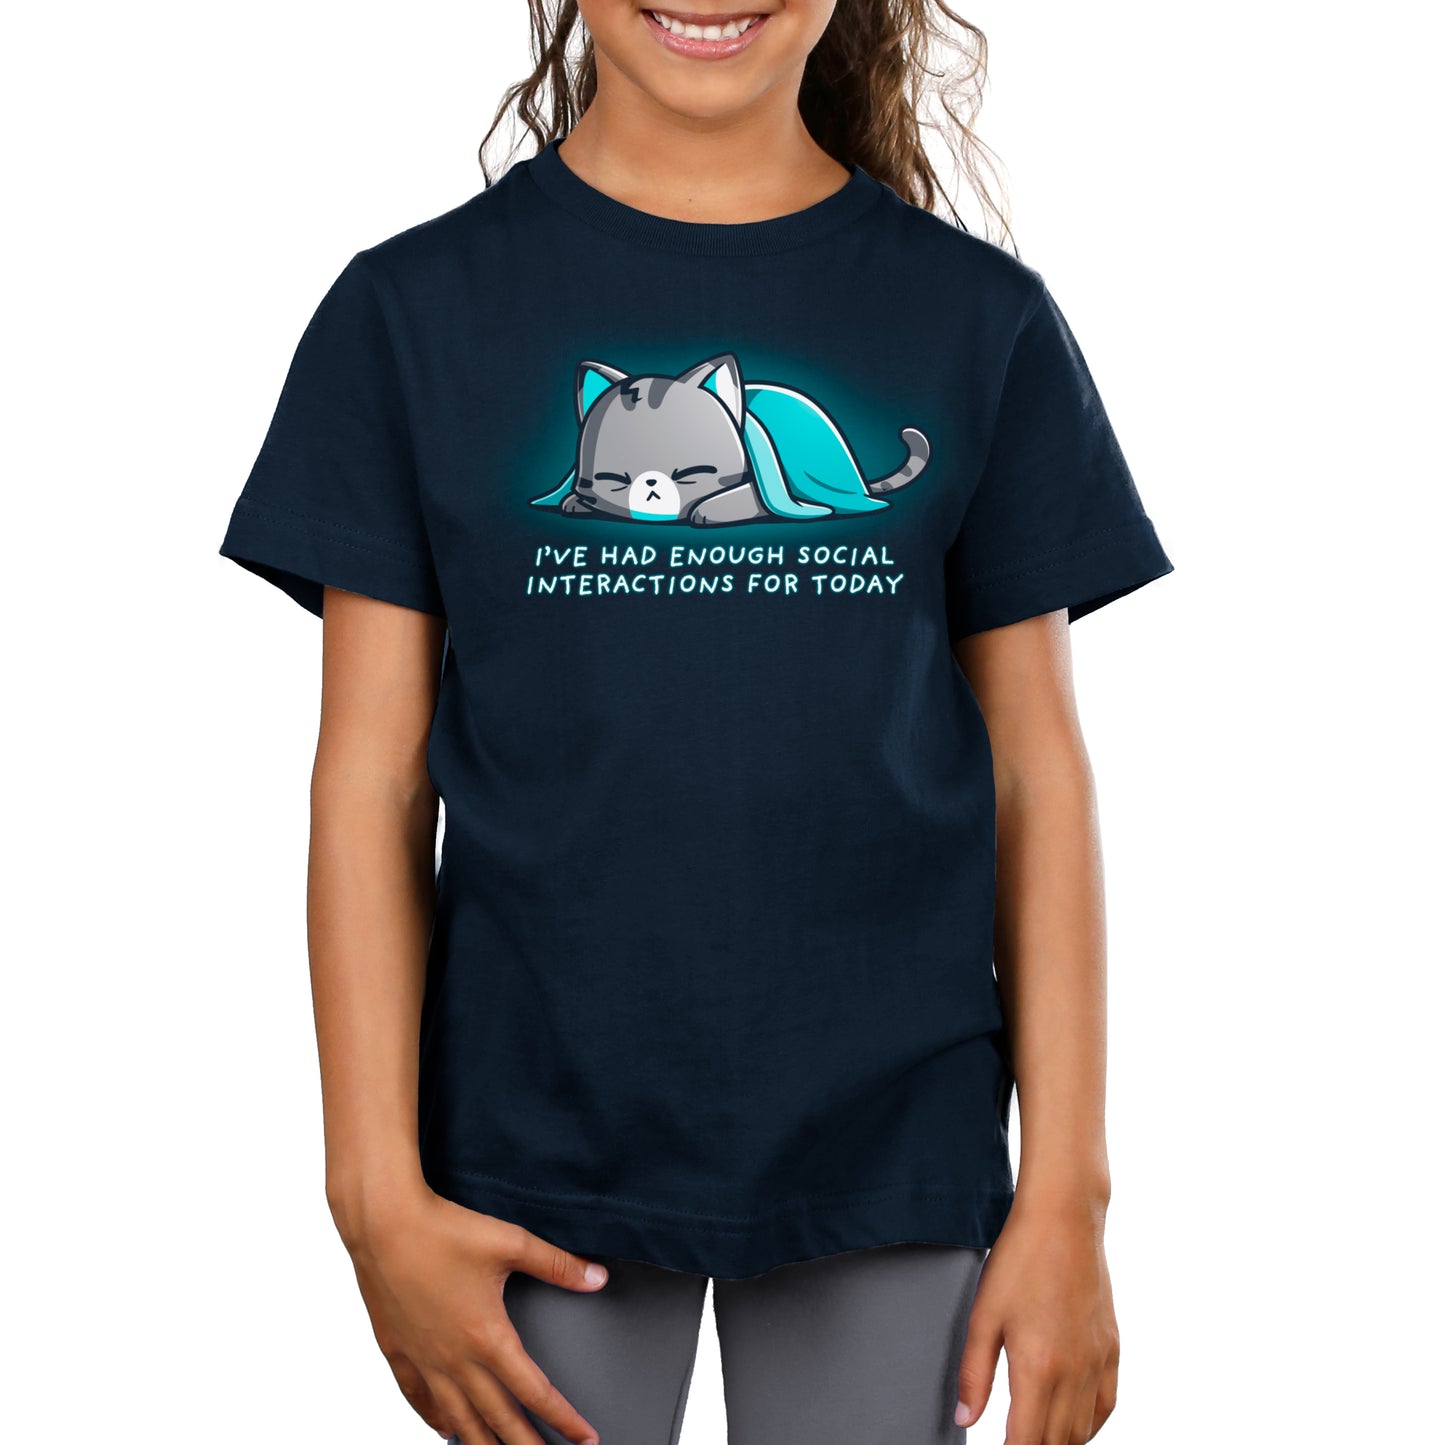 A child wearing a navy blue T-shirt, made of super soft ringspun cotton, with a graphic of a sleeping cat and the text "Enough Social Interactions" from monsterdigital.